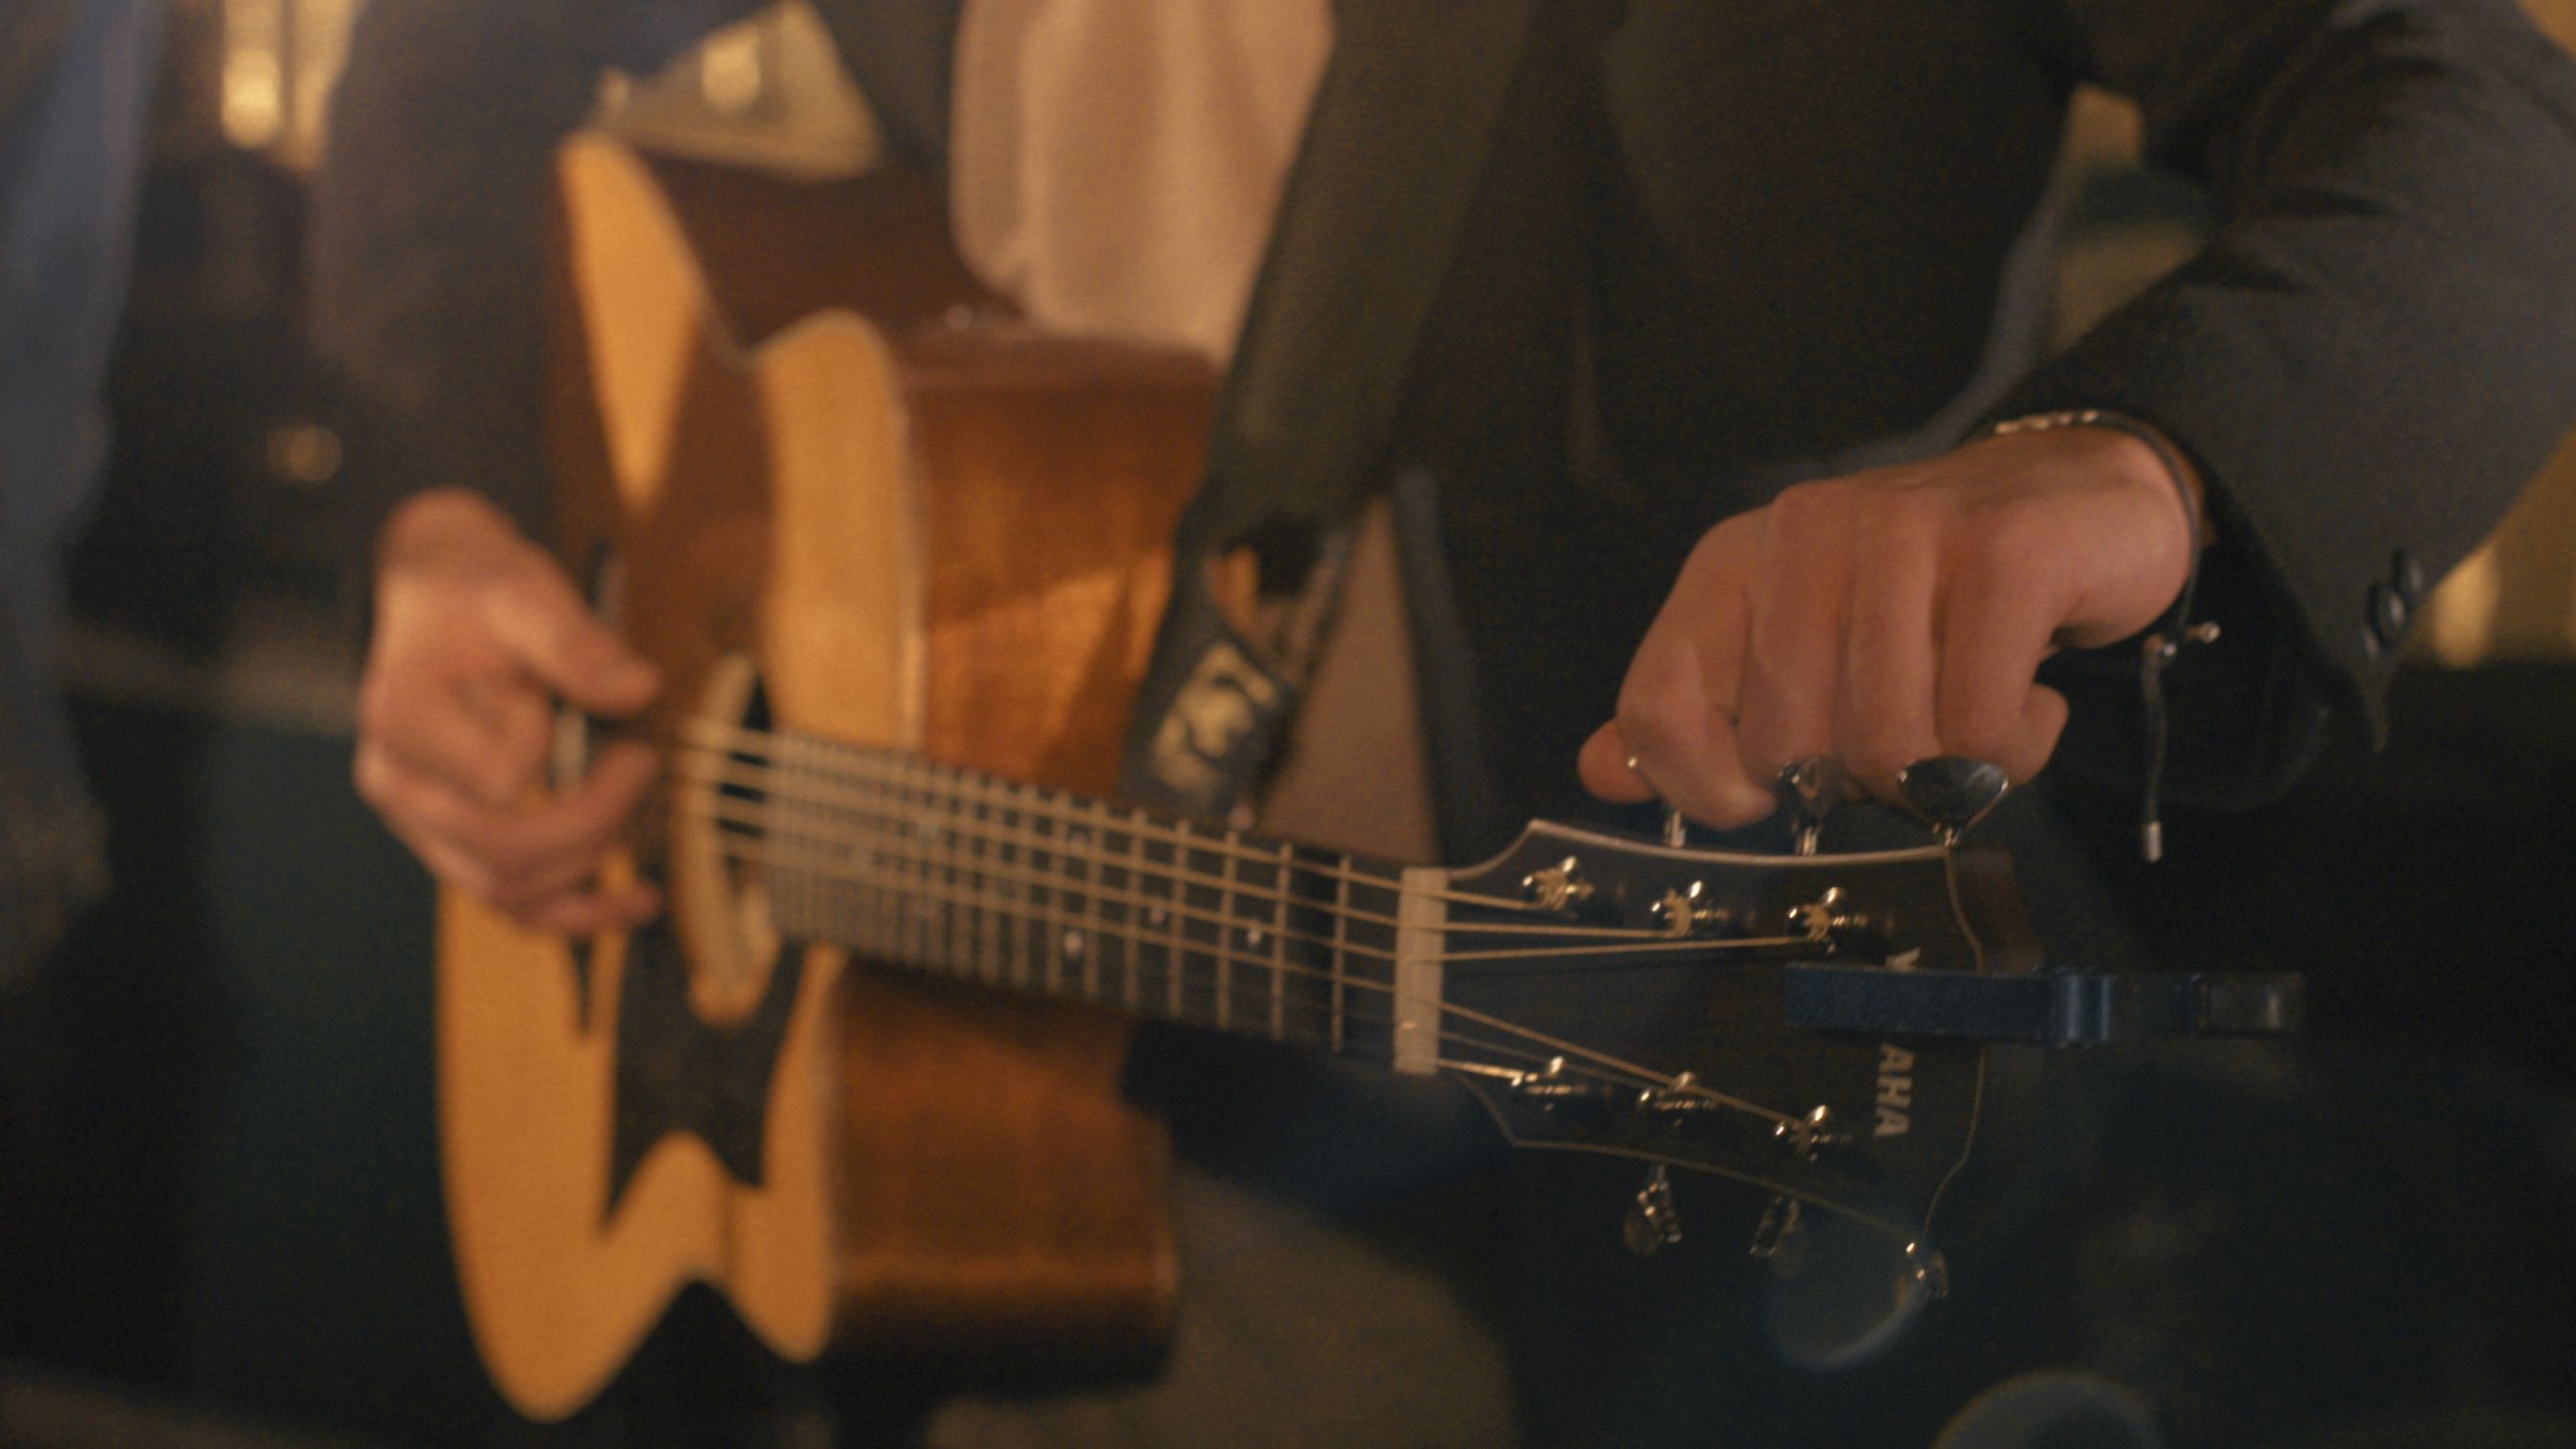 See Brooks Robertson's hands as he tunes his Yamaha acoustic guitar.